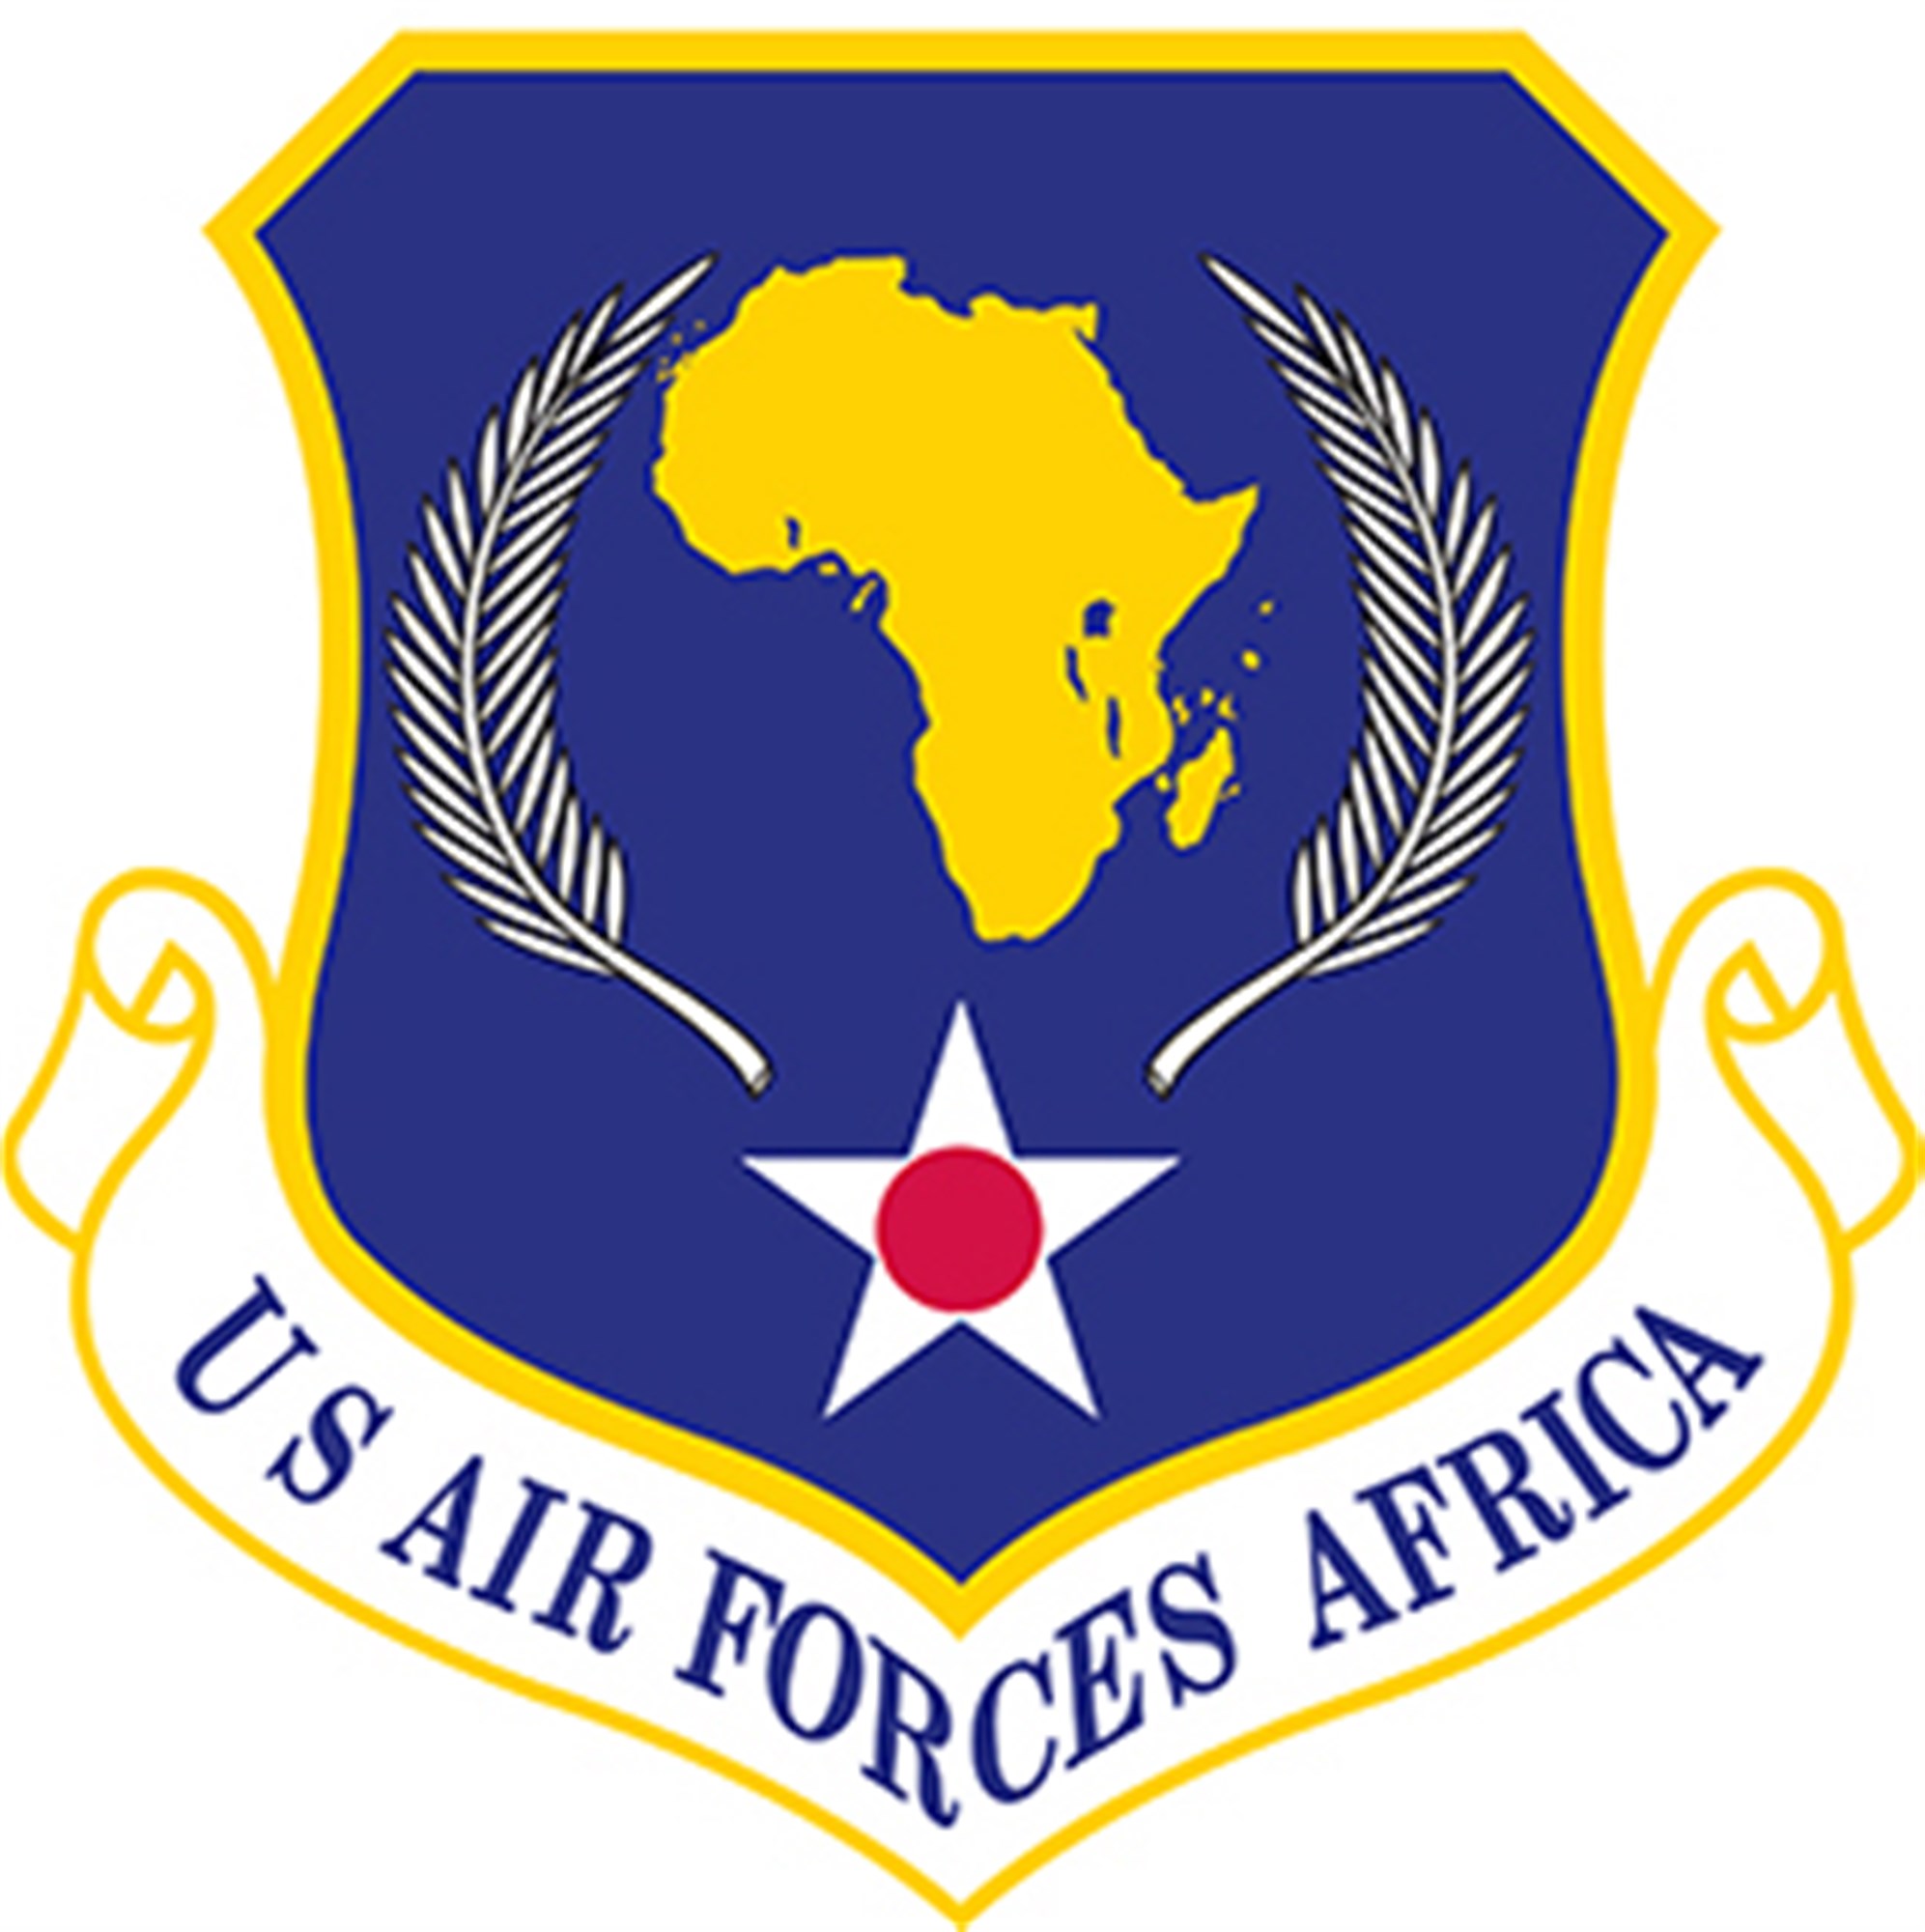 As the air component of USAFRICOM, U.S. Air Forces Africa (AFAFRICA) conducts sustained security engagement and operations to promote air safety, security, and development in Africa. 